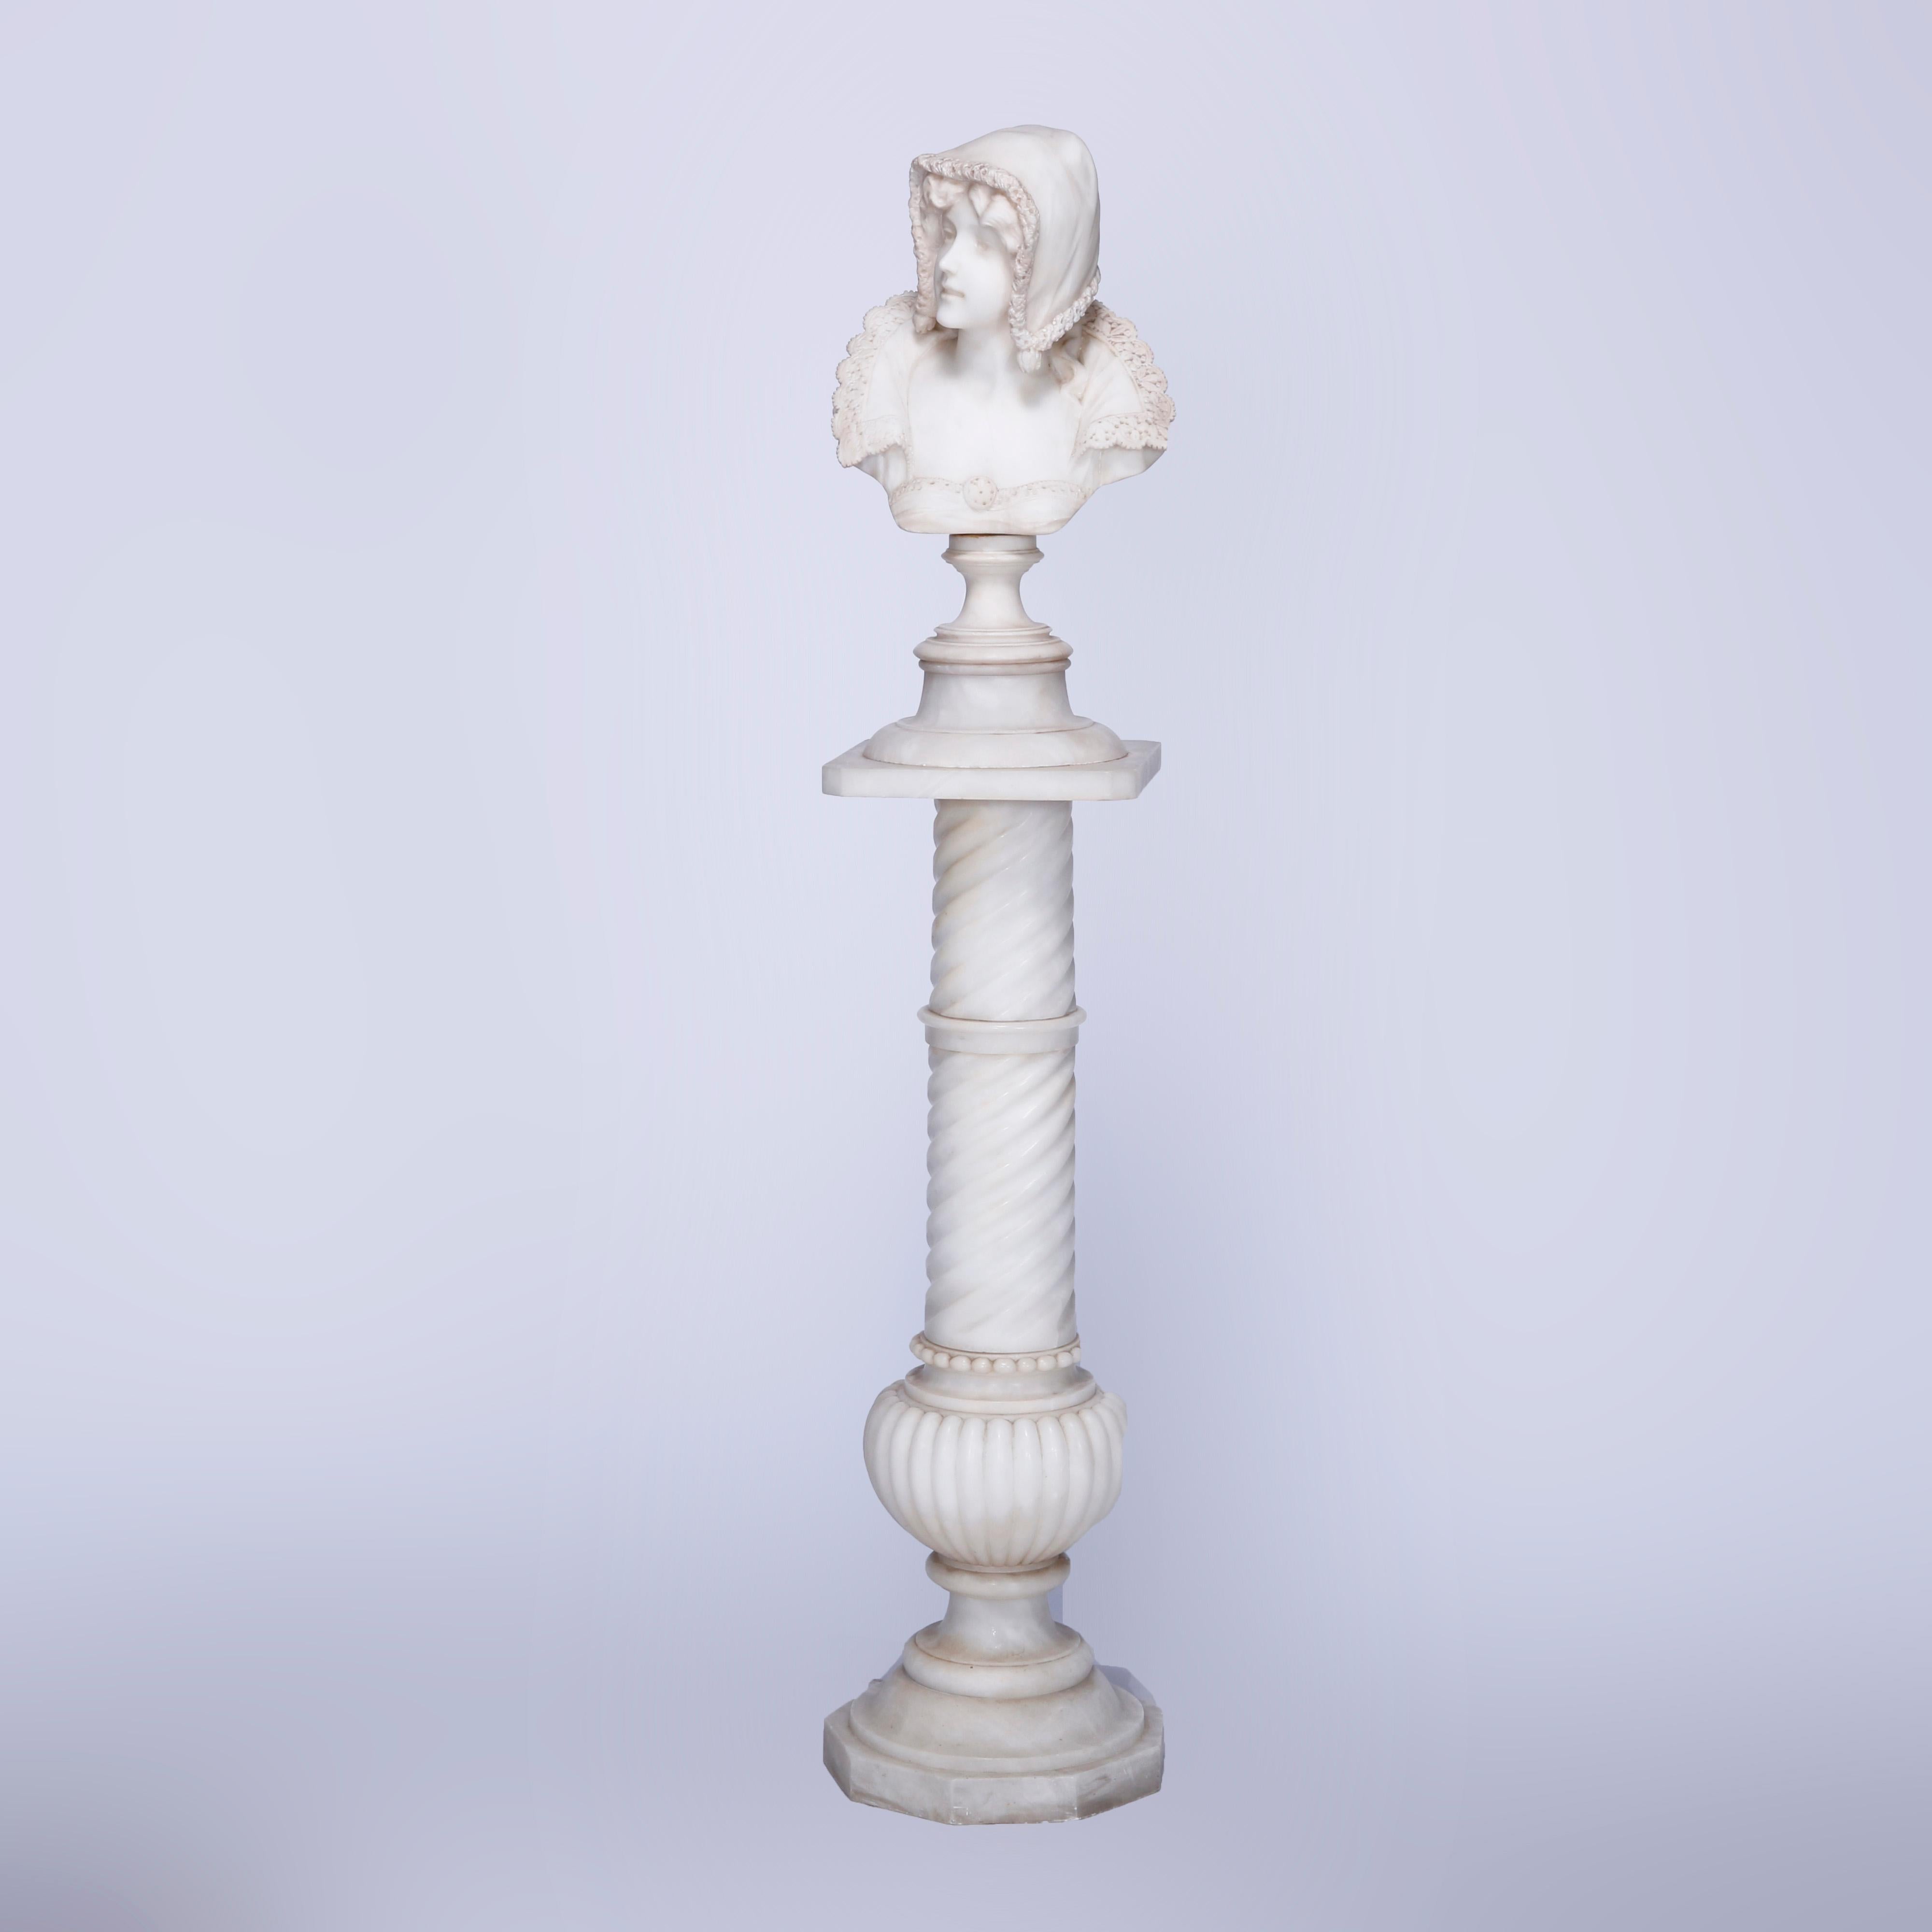 An antique classical sculpture offers carved alabaster portrait bust of a woman seated on pedestal with rope twist column, c1890

Measures - 55.5'' H x 10.5'' W x 10.5'' D.